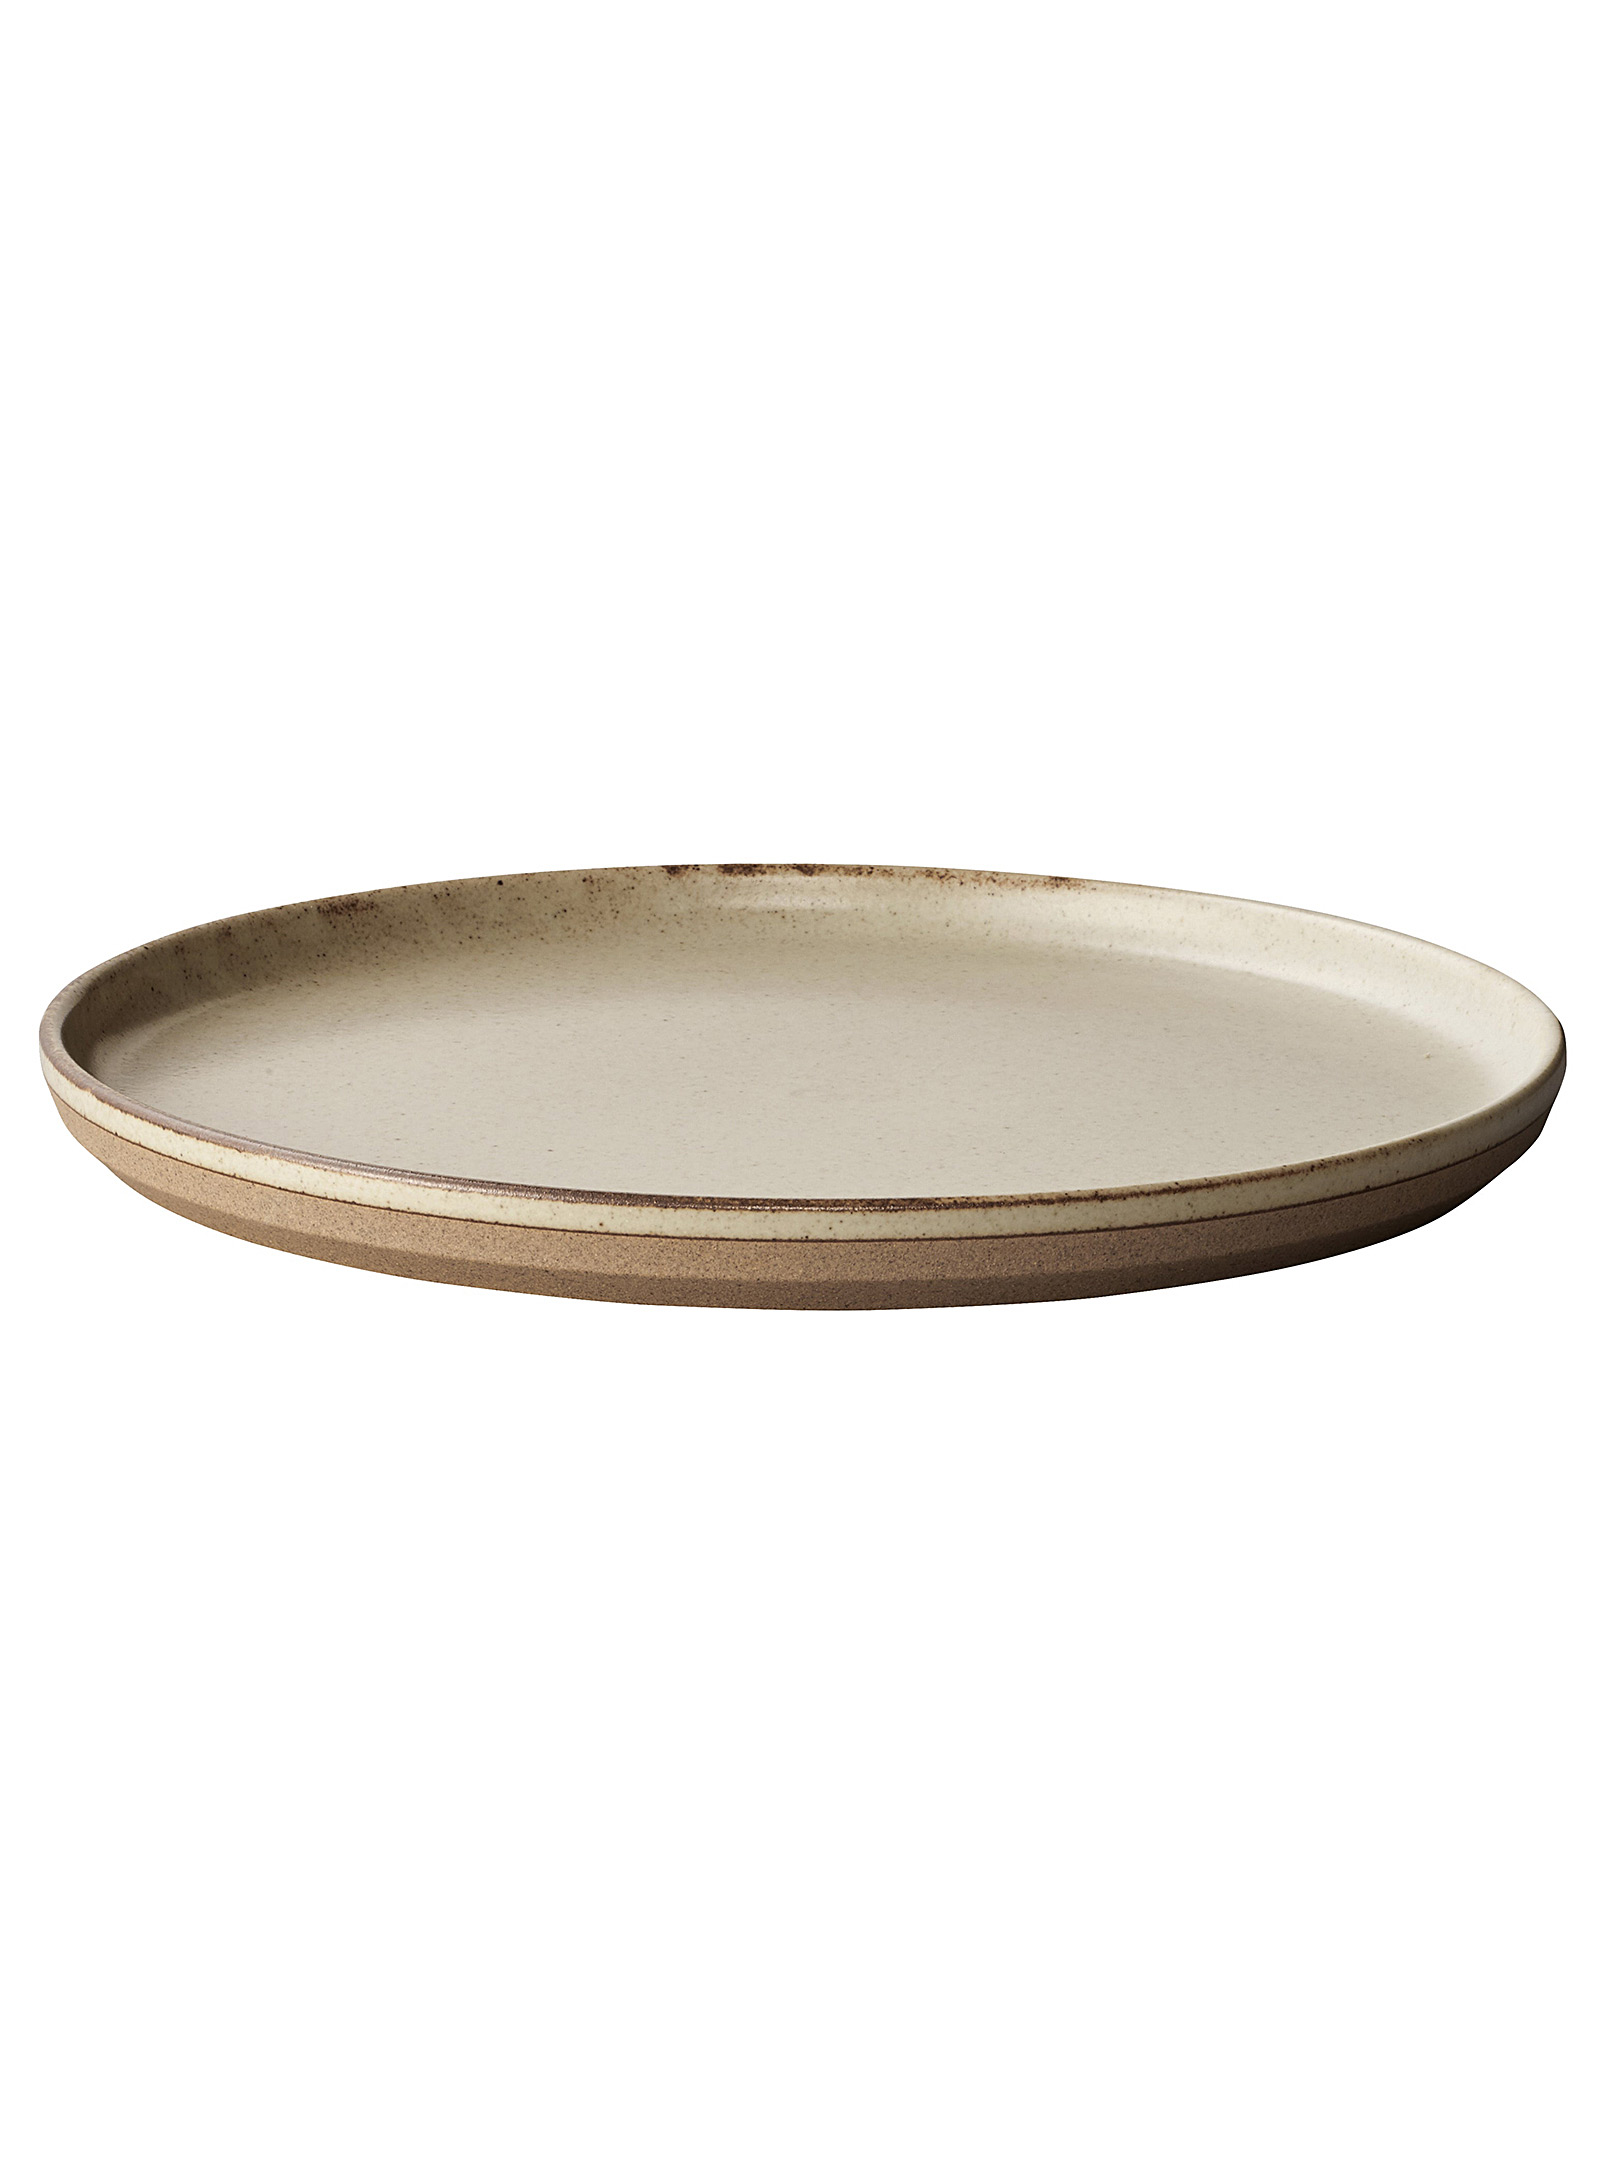 Kinto Two-tone Porcelain Plates Set Of 3 In Cream Beige